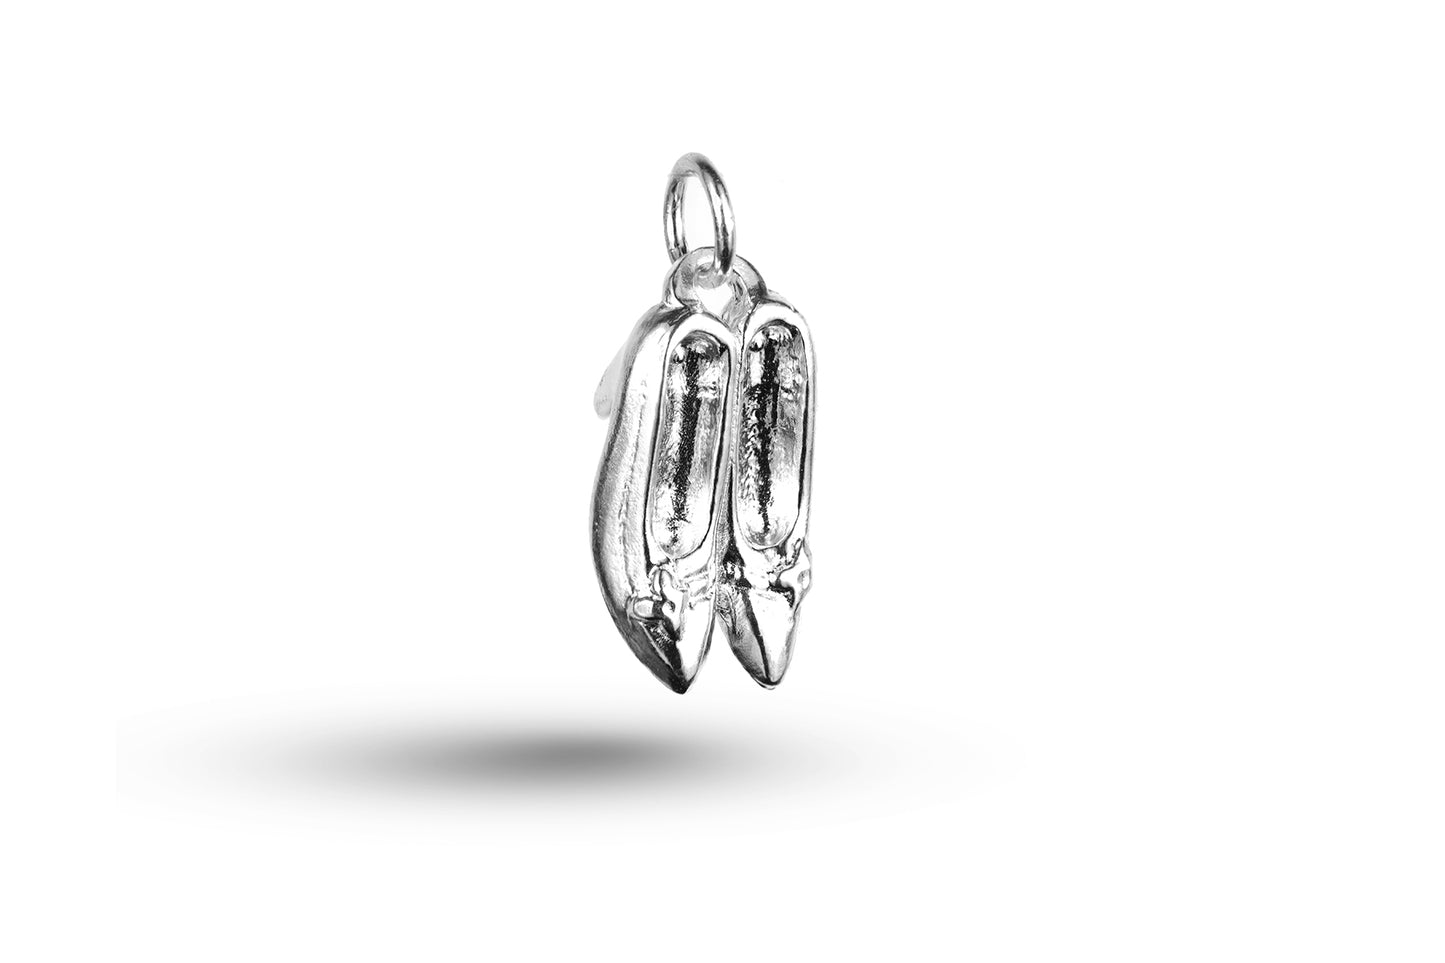 White gold Pair of Shoes charm.